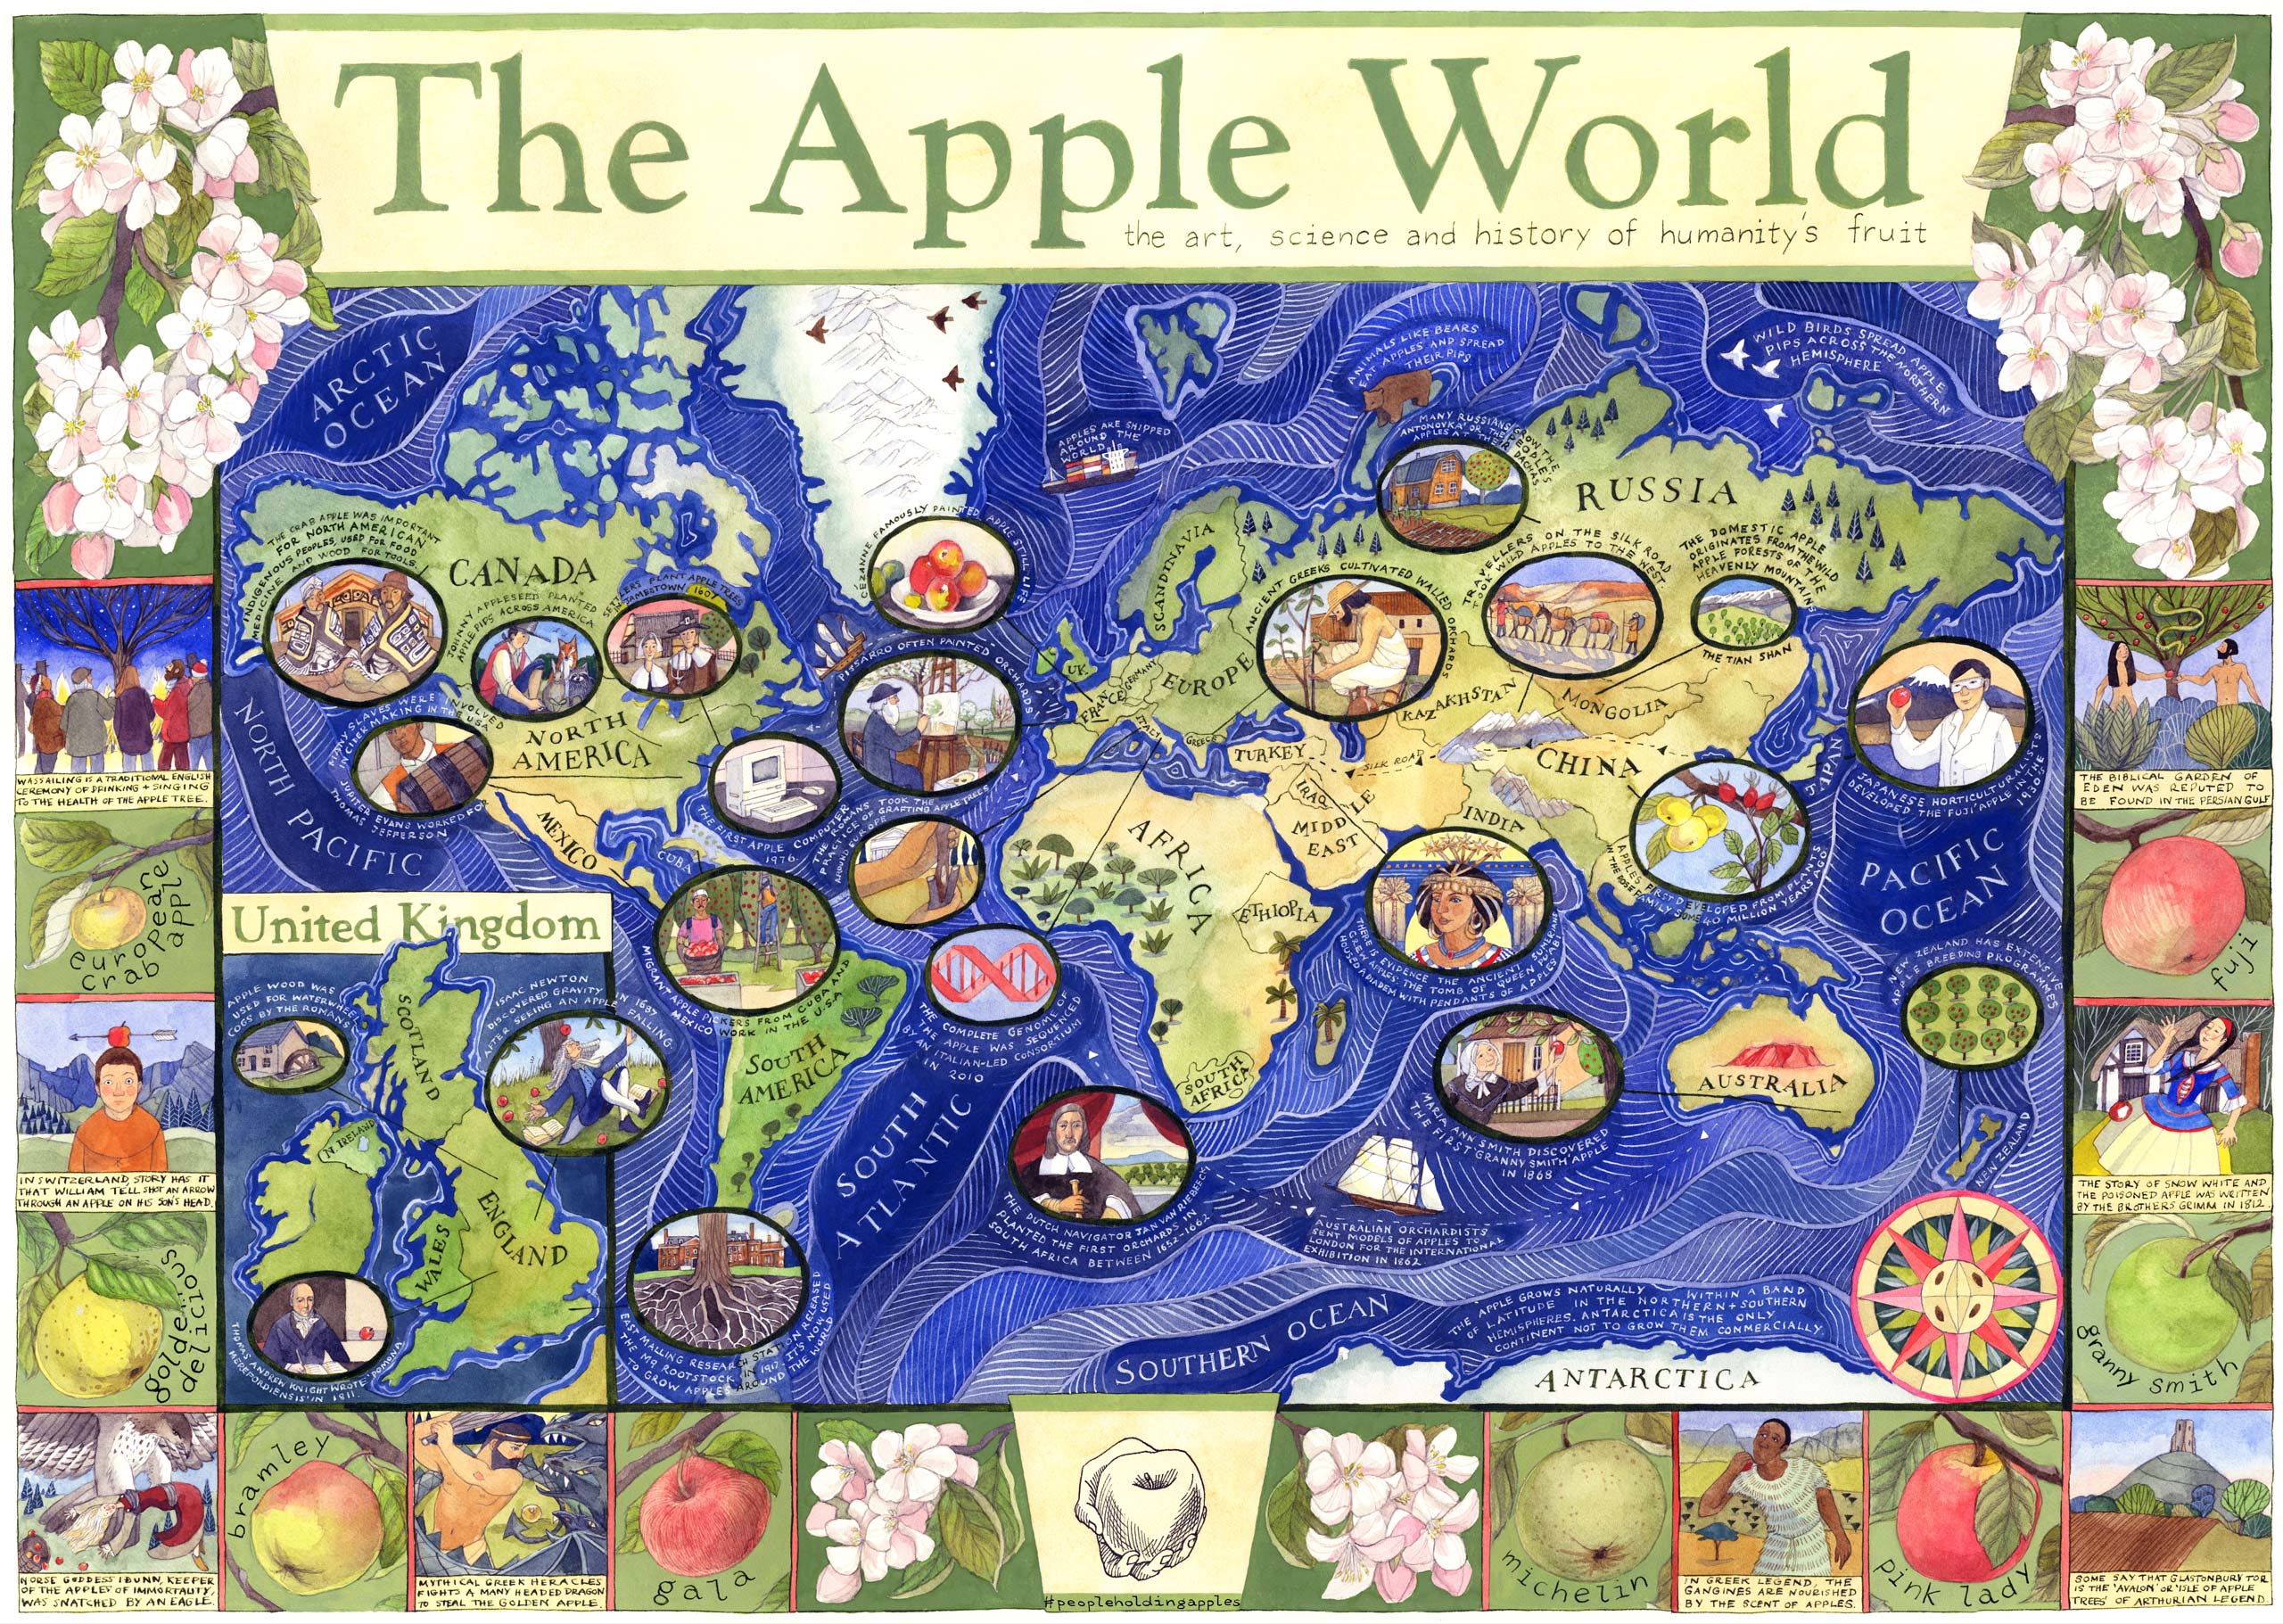 The Apple World Map by Helen Cann commissioned by and licensed to the Cider Museum, Brightspace Foundation and National Trust Copyright © Helen Cann 2020